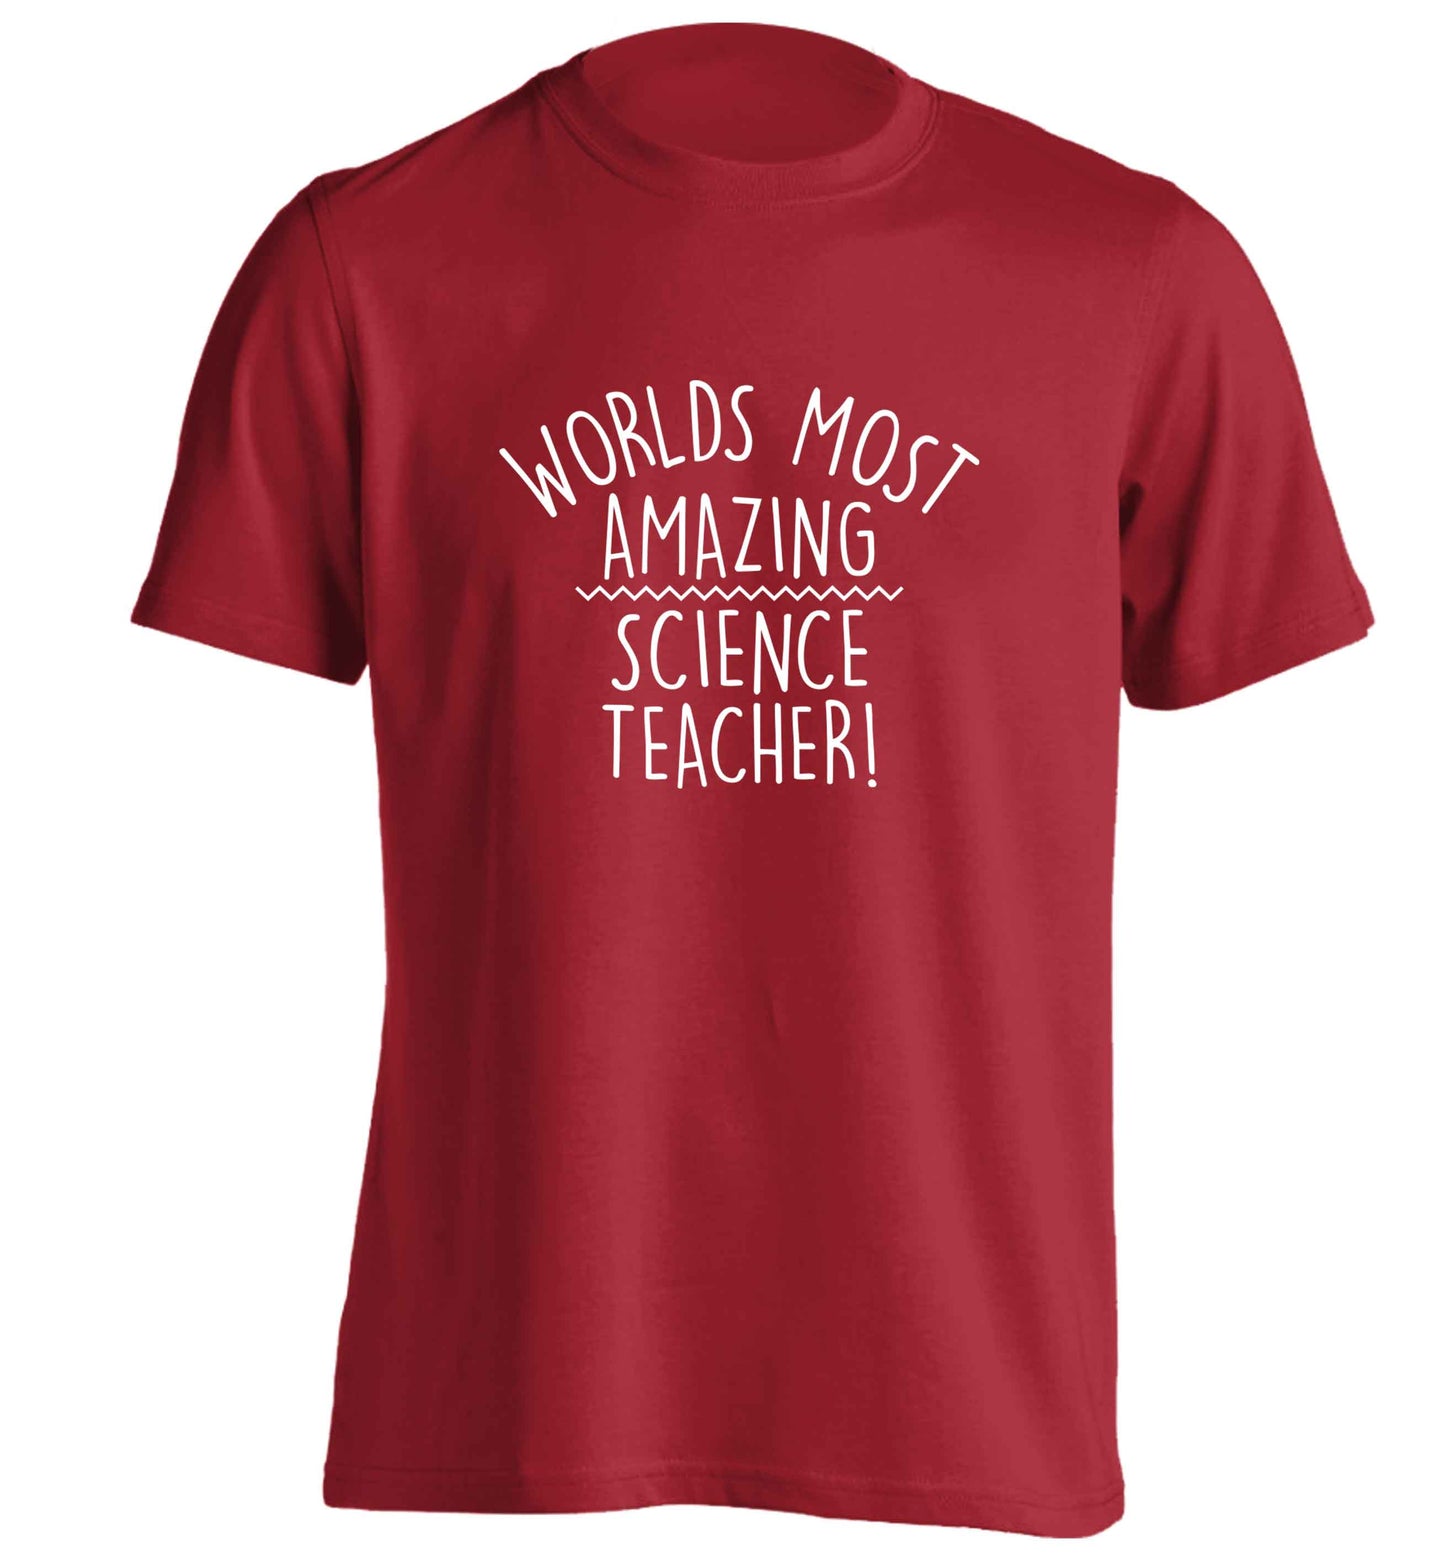 Worlds most amazing science teacher adults unisex red Tshirt 2XL